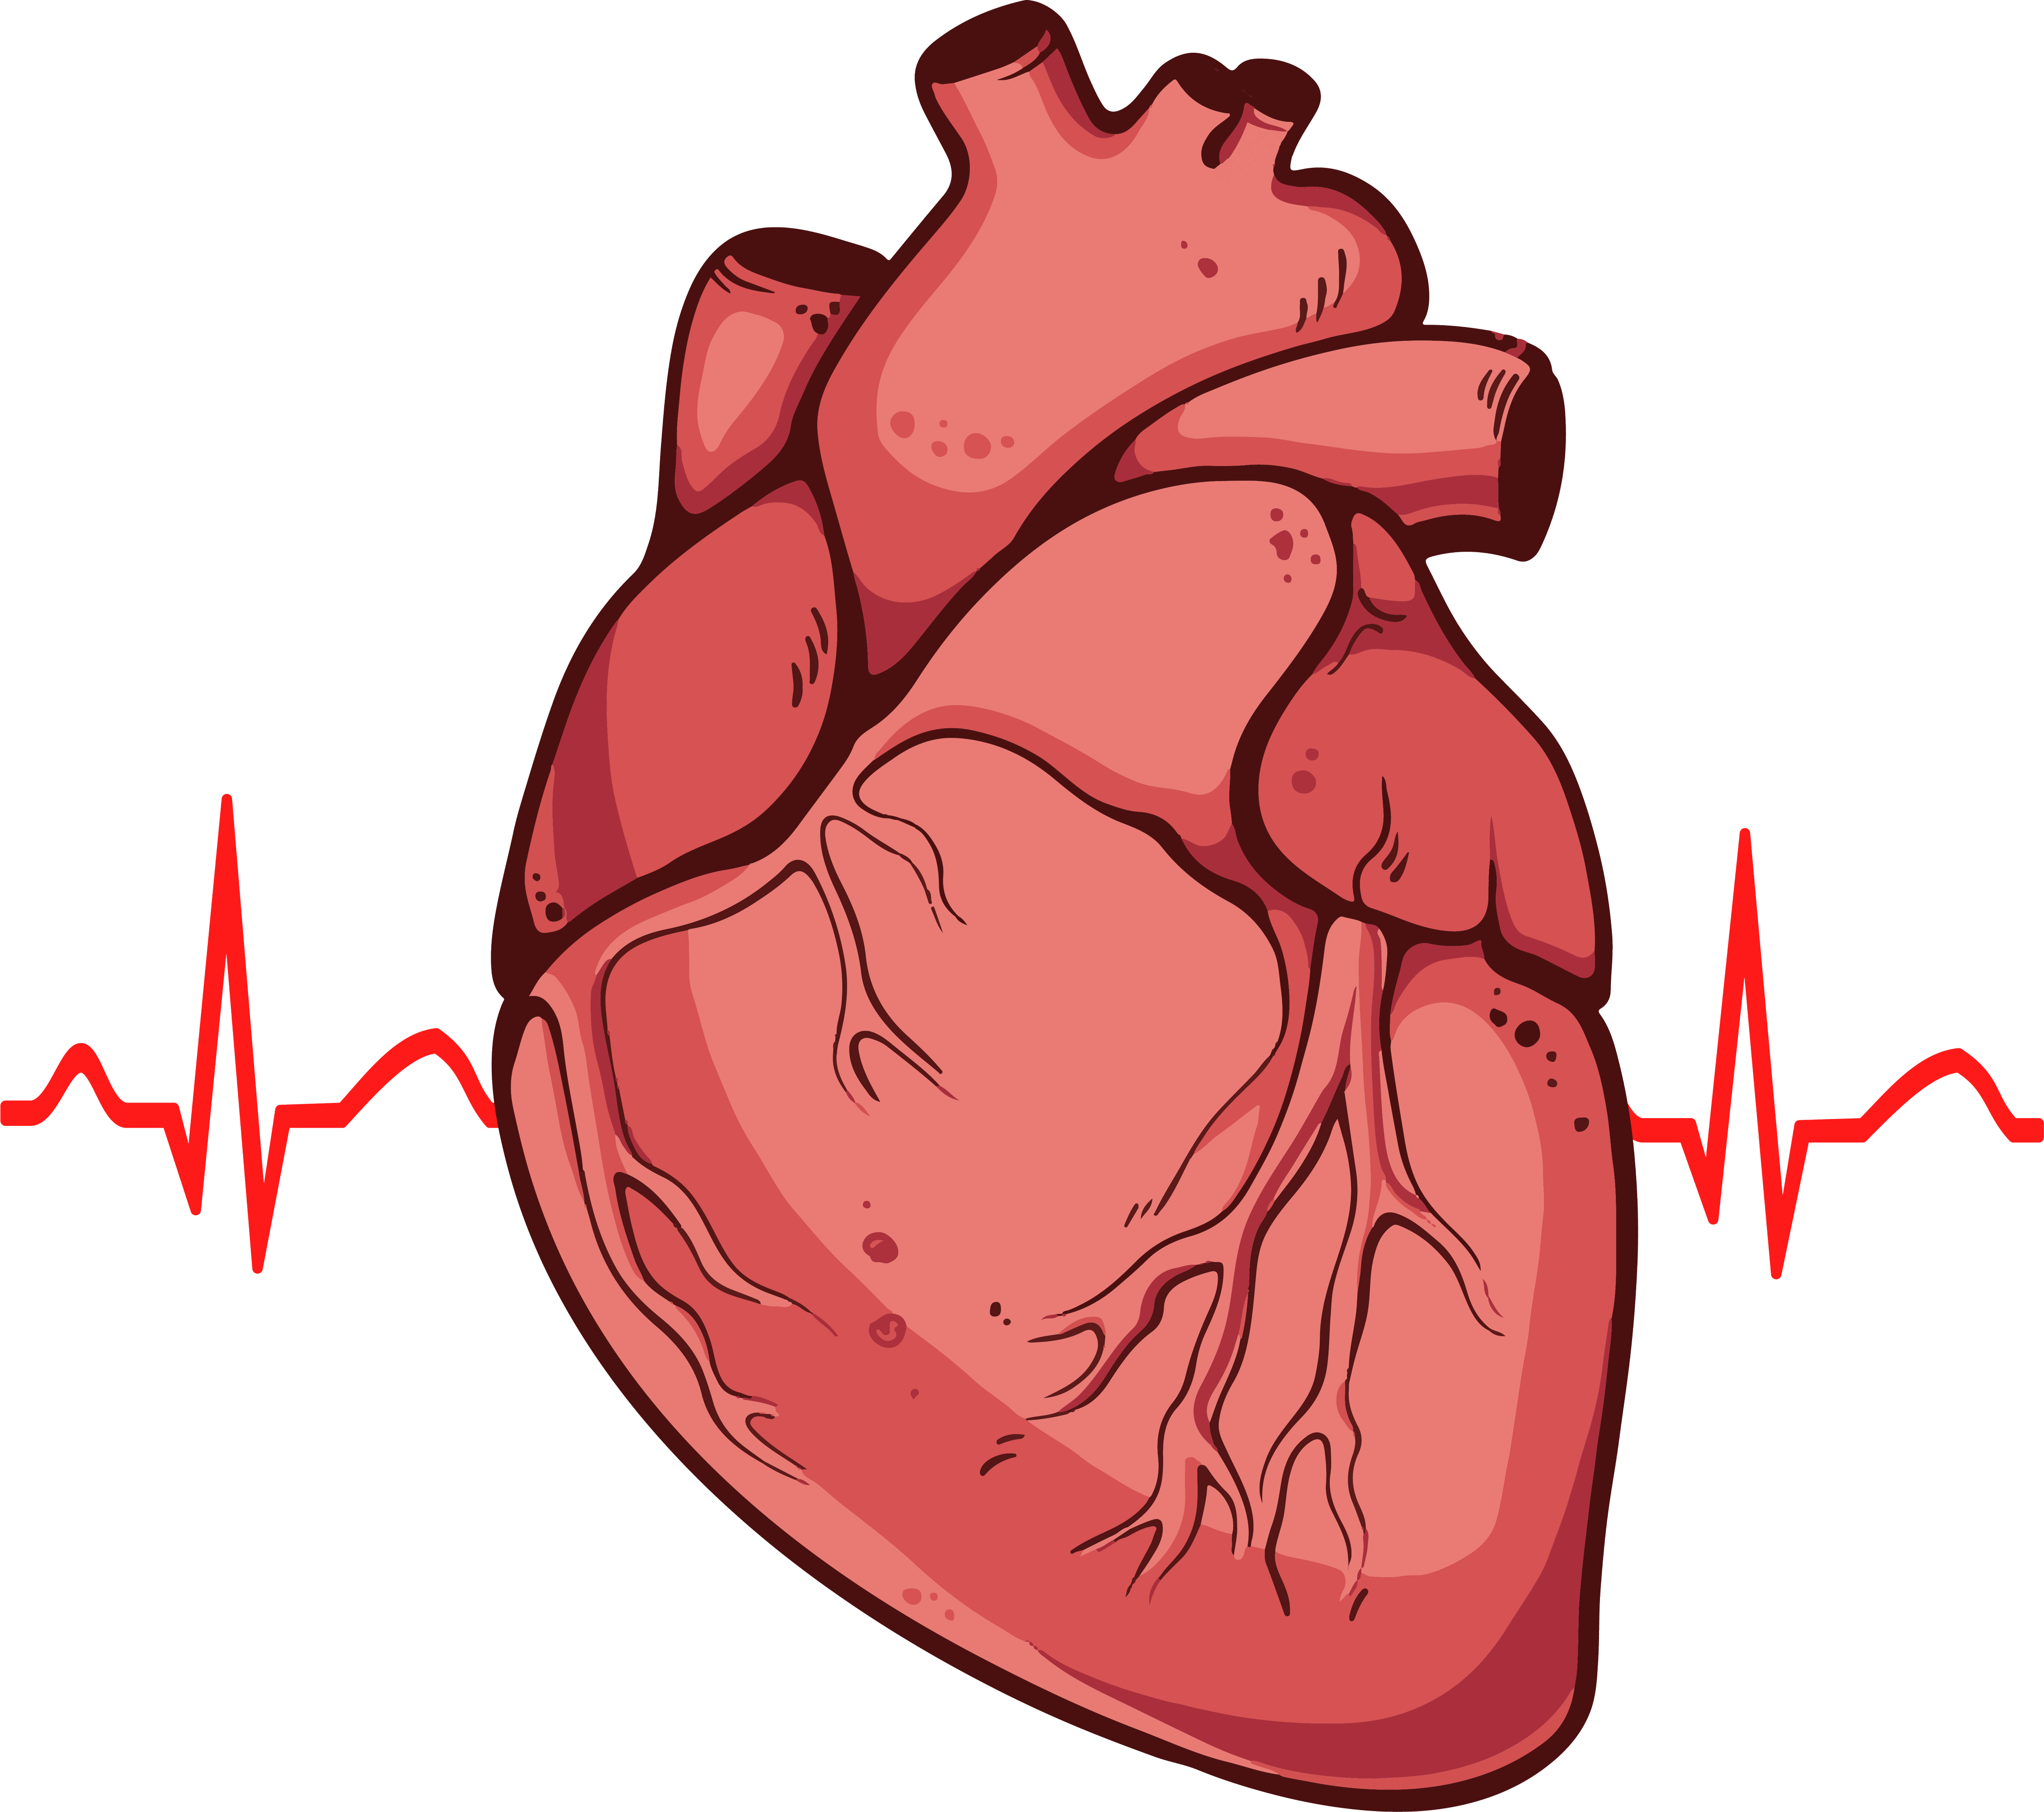 Red Human Heart PNG Transparent Image